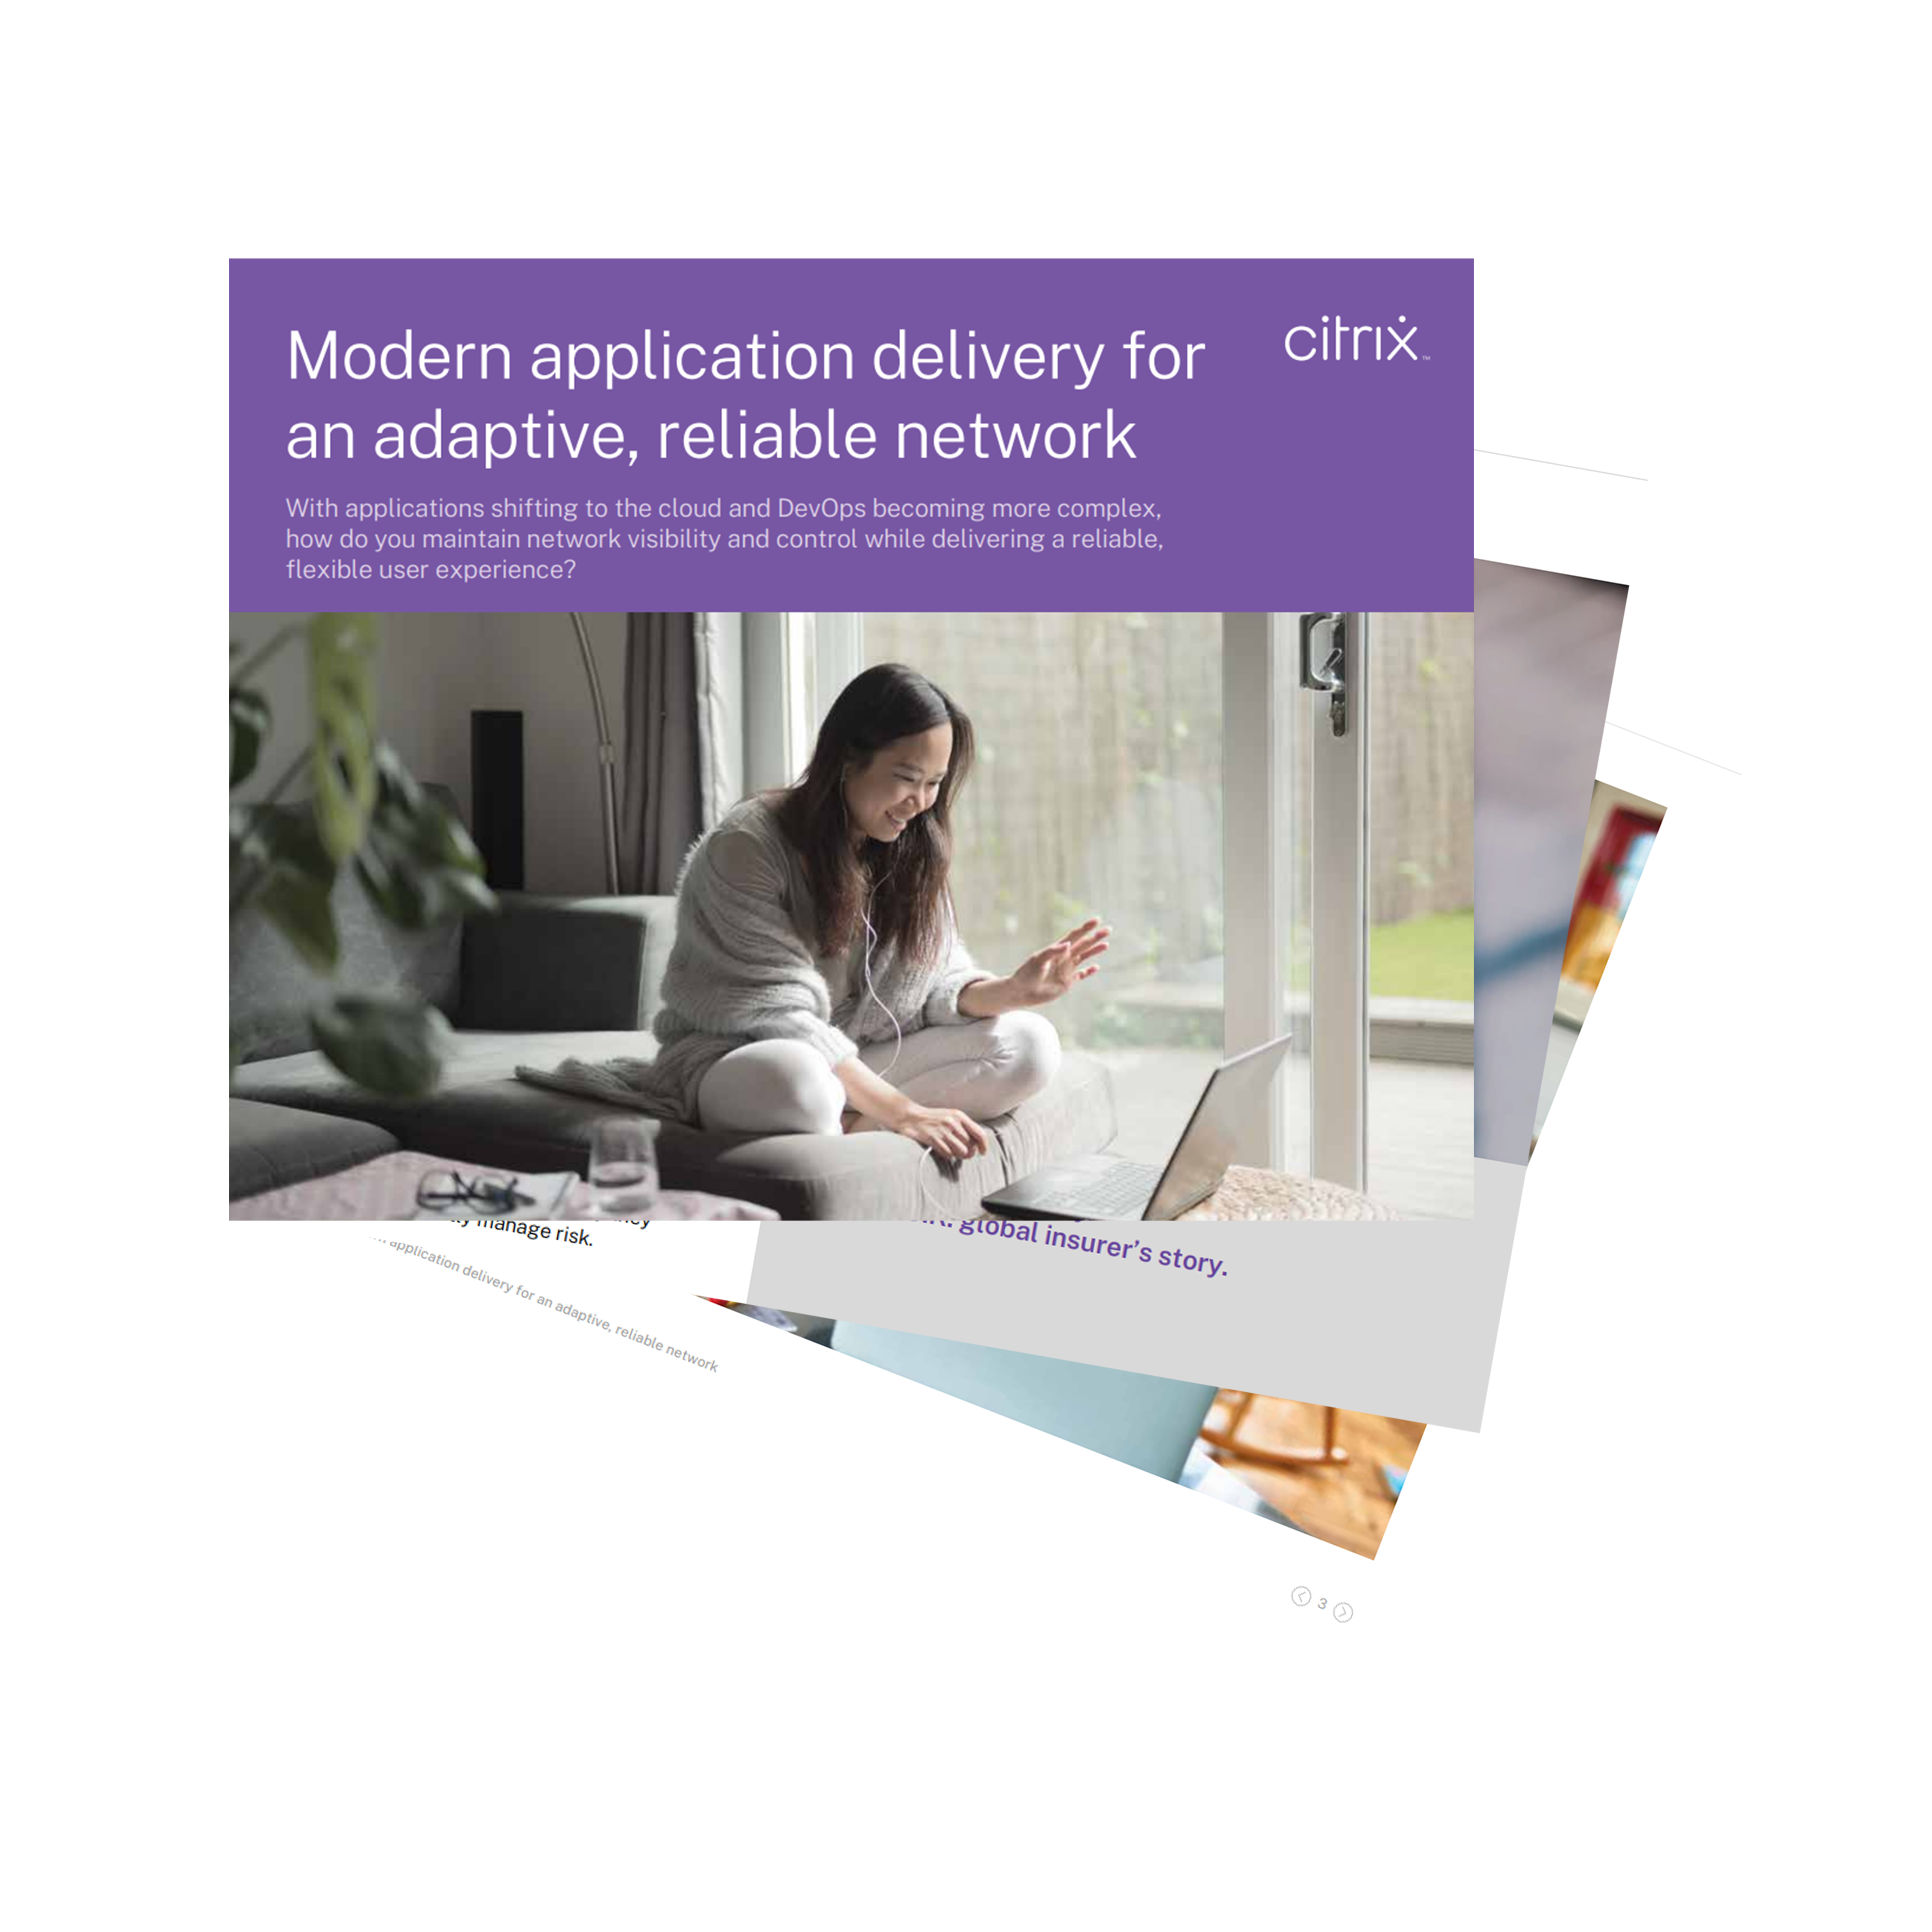 Visual-content-CITRIX-Modern-application-delivery-Ebook-May-2021_